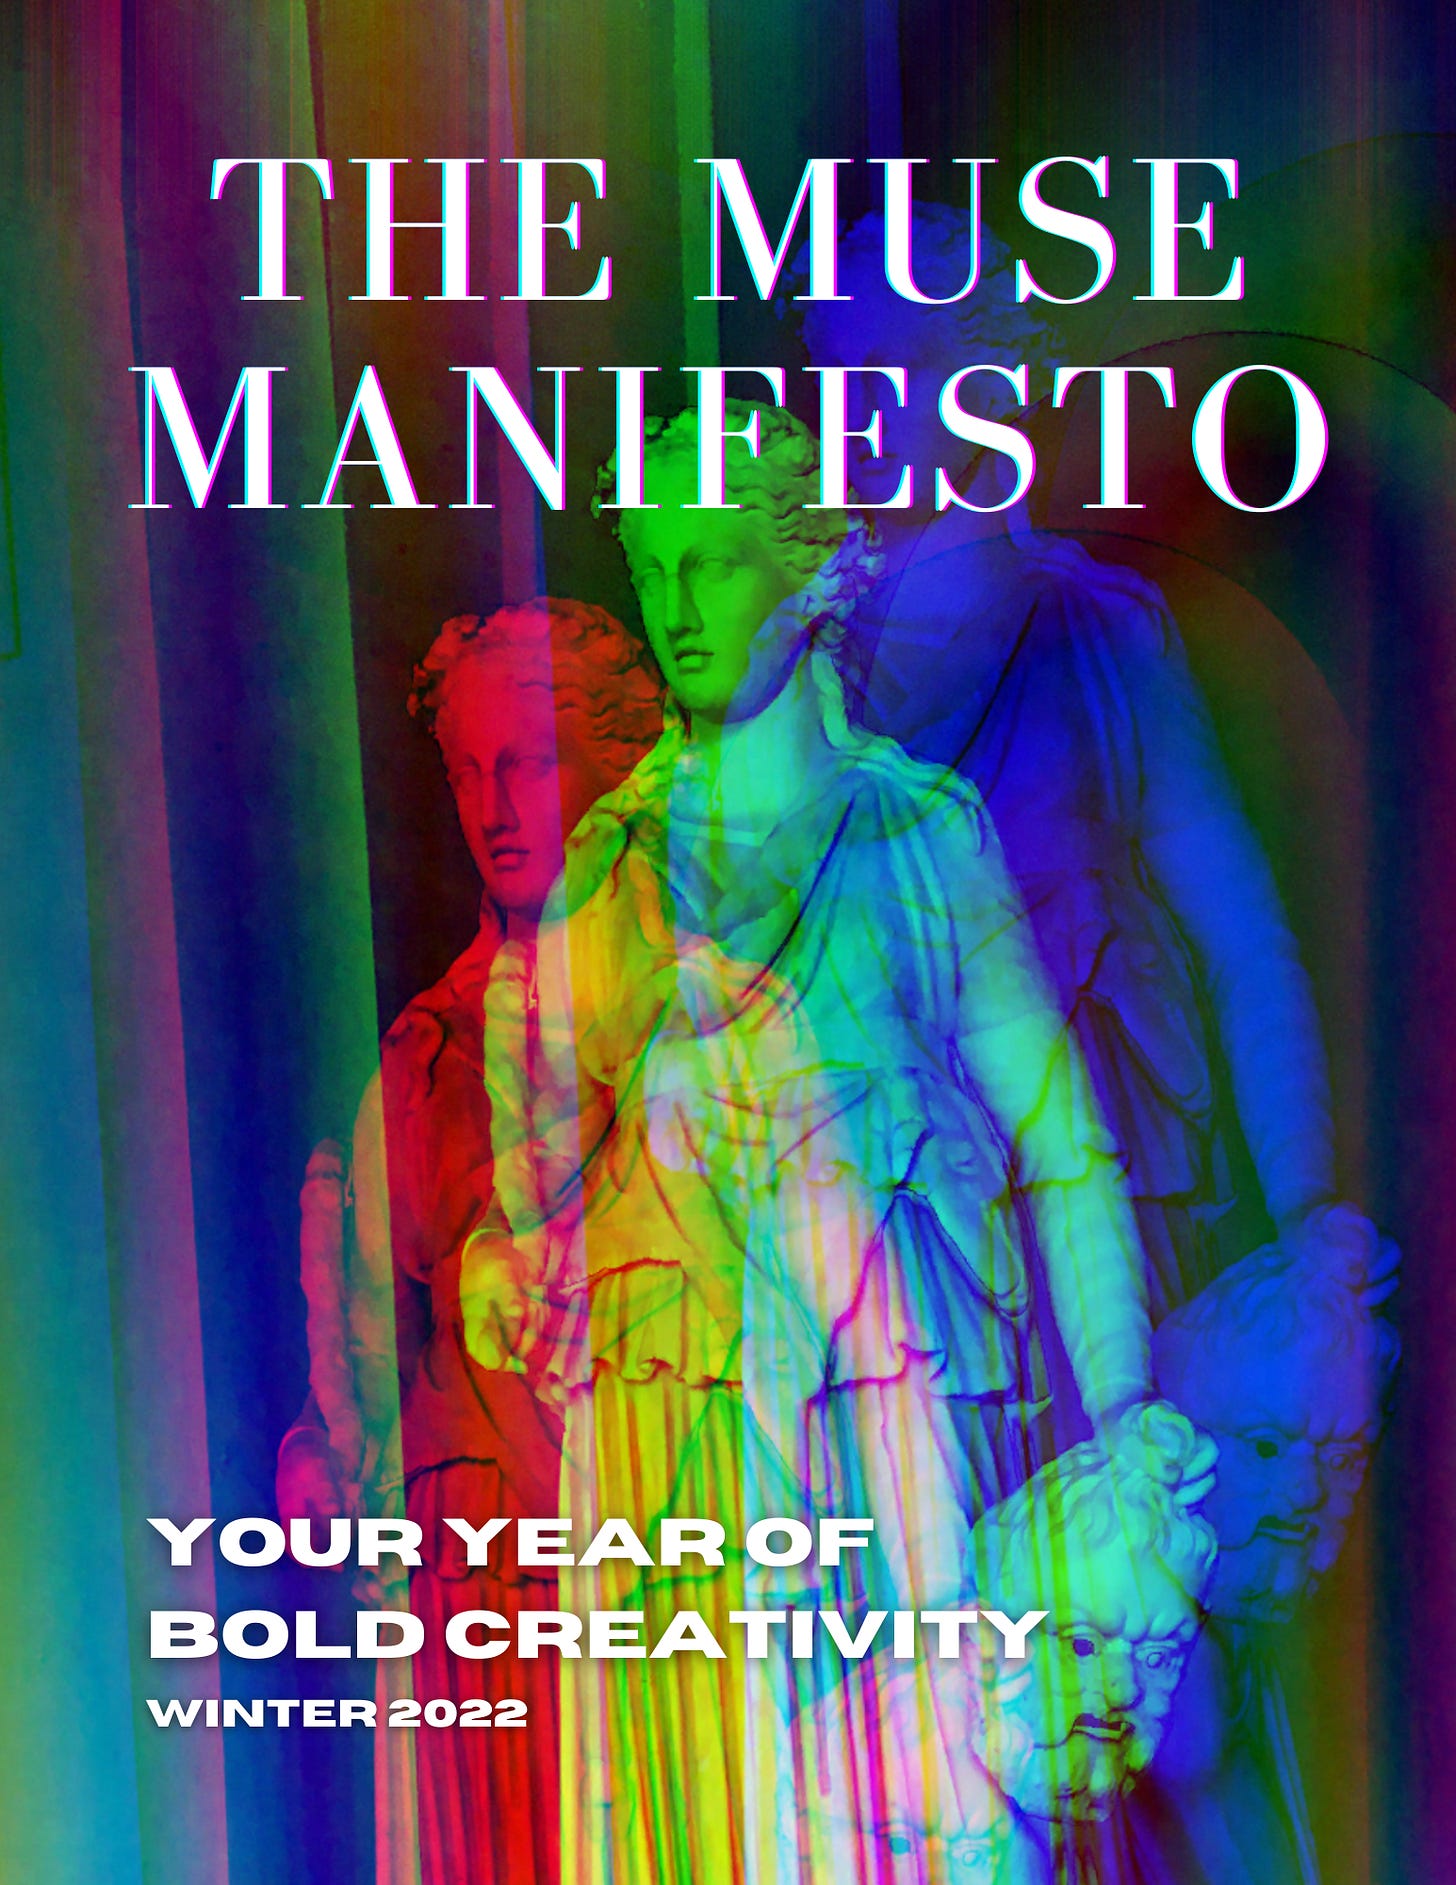 The cover of issue 1 of The Muse Manifesto: a glitchy photo of a statue of the muse Thalia